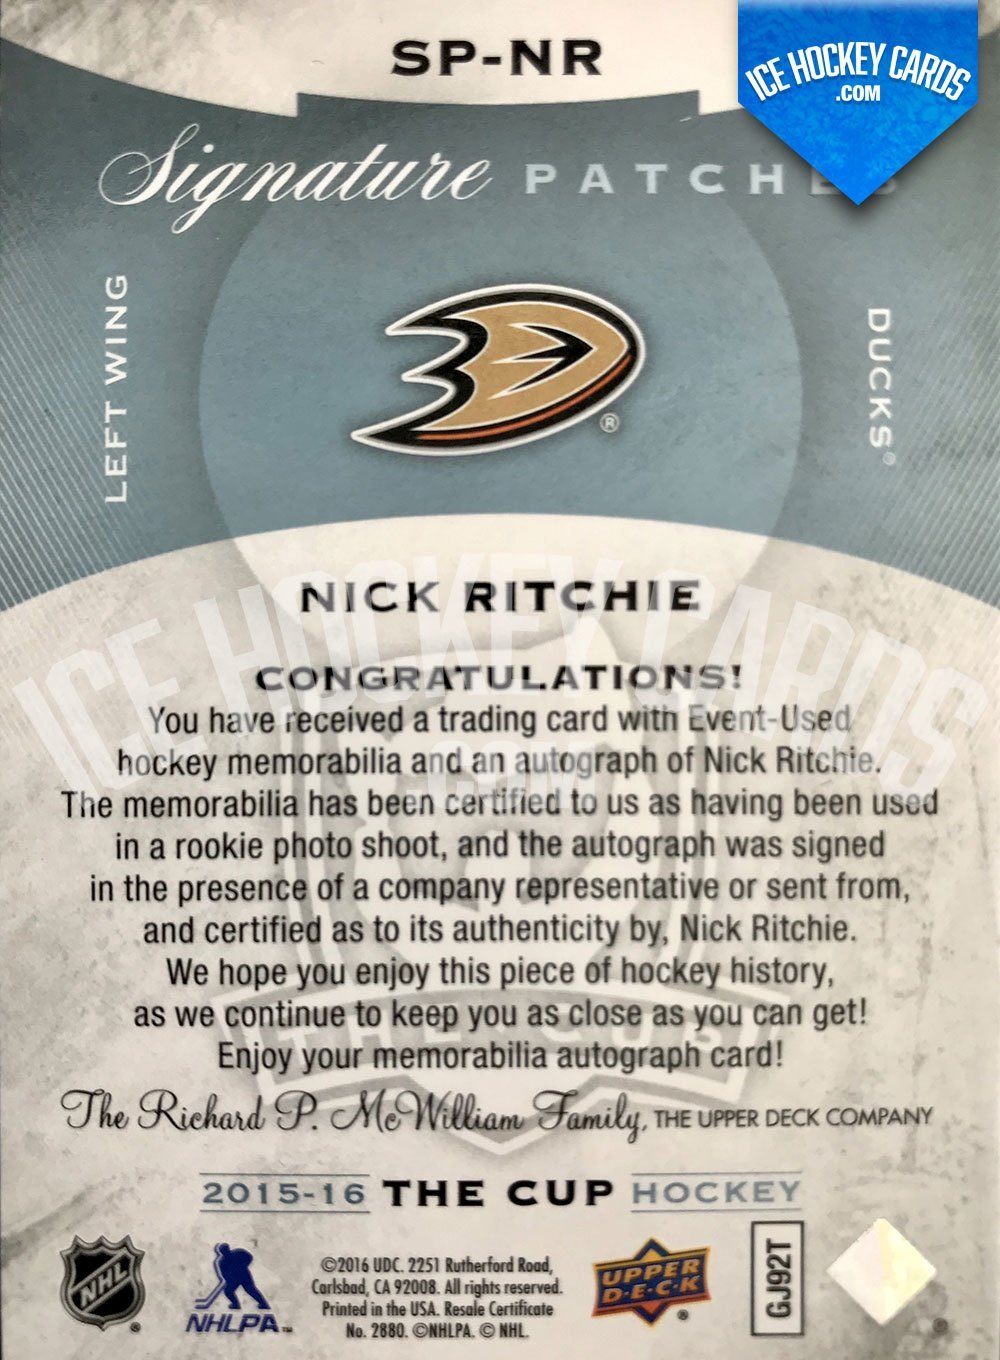 Upper Deck - The Cup 2015-16 - Nick Ritchie Signature Patches Auto back